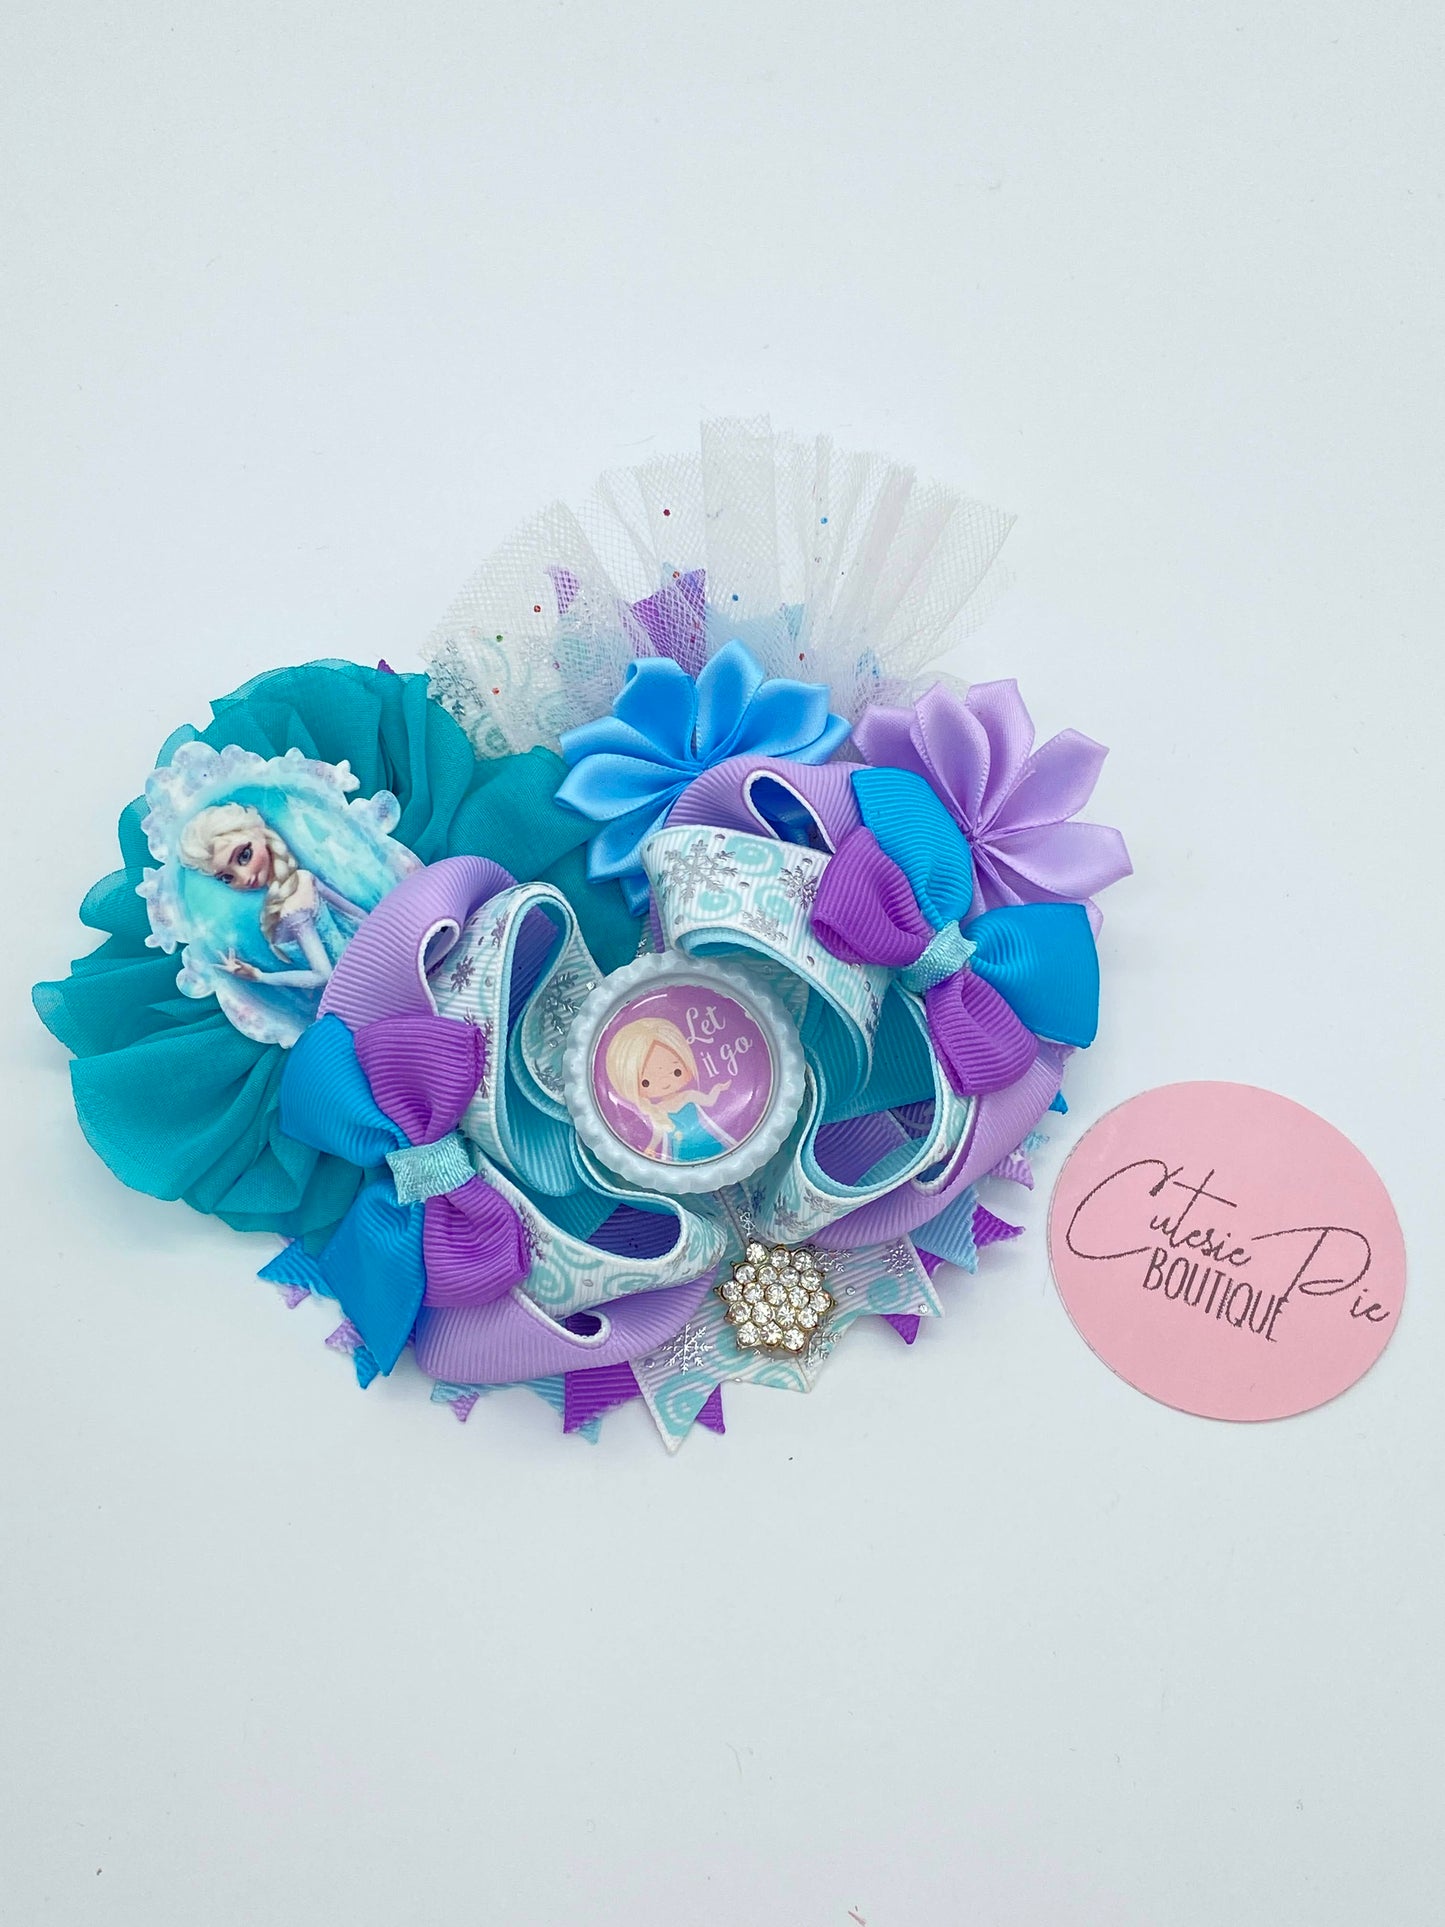 Over the Top Hair Bow - { Princess Collection }